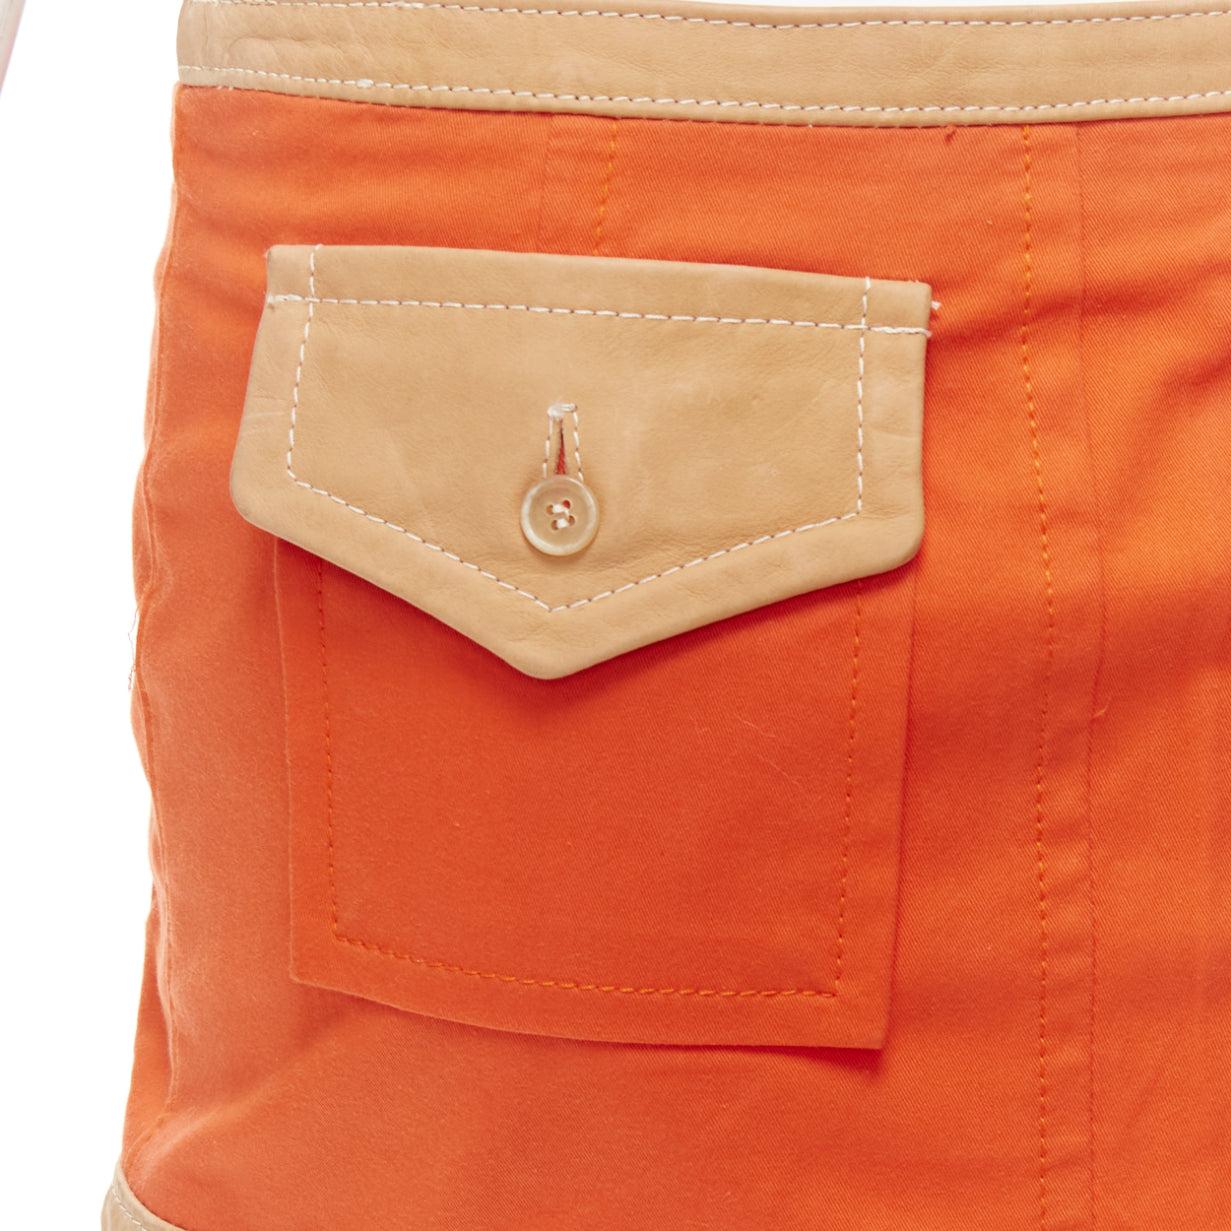 DSQUARED2 orange beige canvas leather zip front pocket mini skirt IT38 XS
Reference: ANWU/A01174
Brand: Dsquared2
Material: Leather, Canvas
Color: Orange, Beige
Pattern: Solid
Closure: Zip
Lining: White Fabric
Extra Details: Leather flap pockets